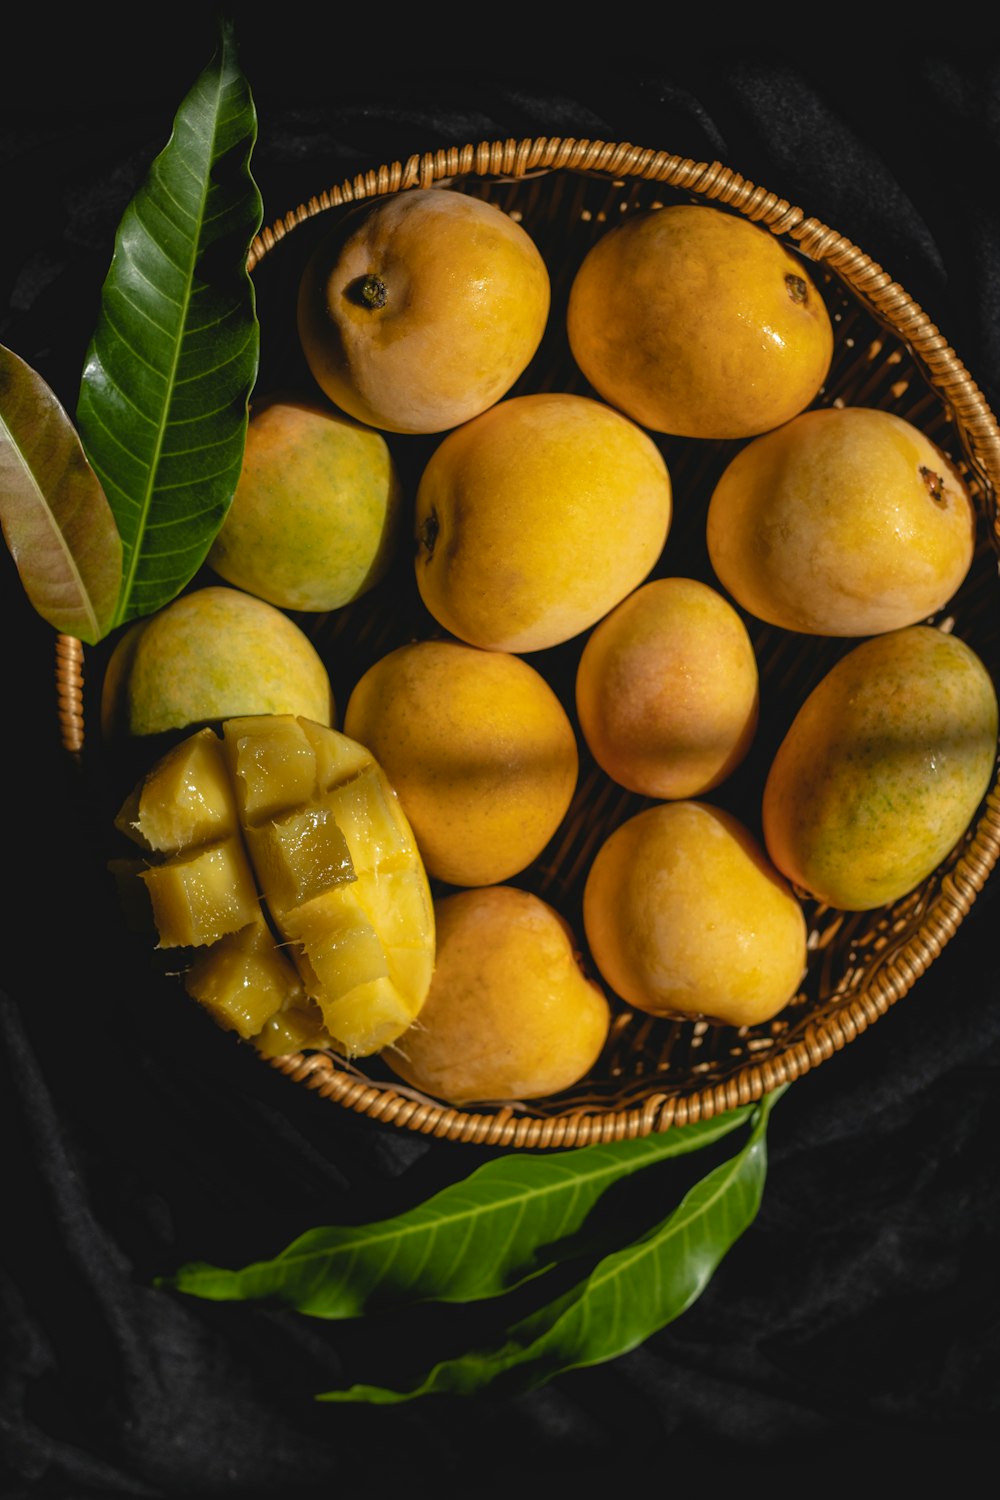 a basket of yellow and green fruit